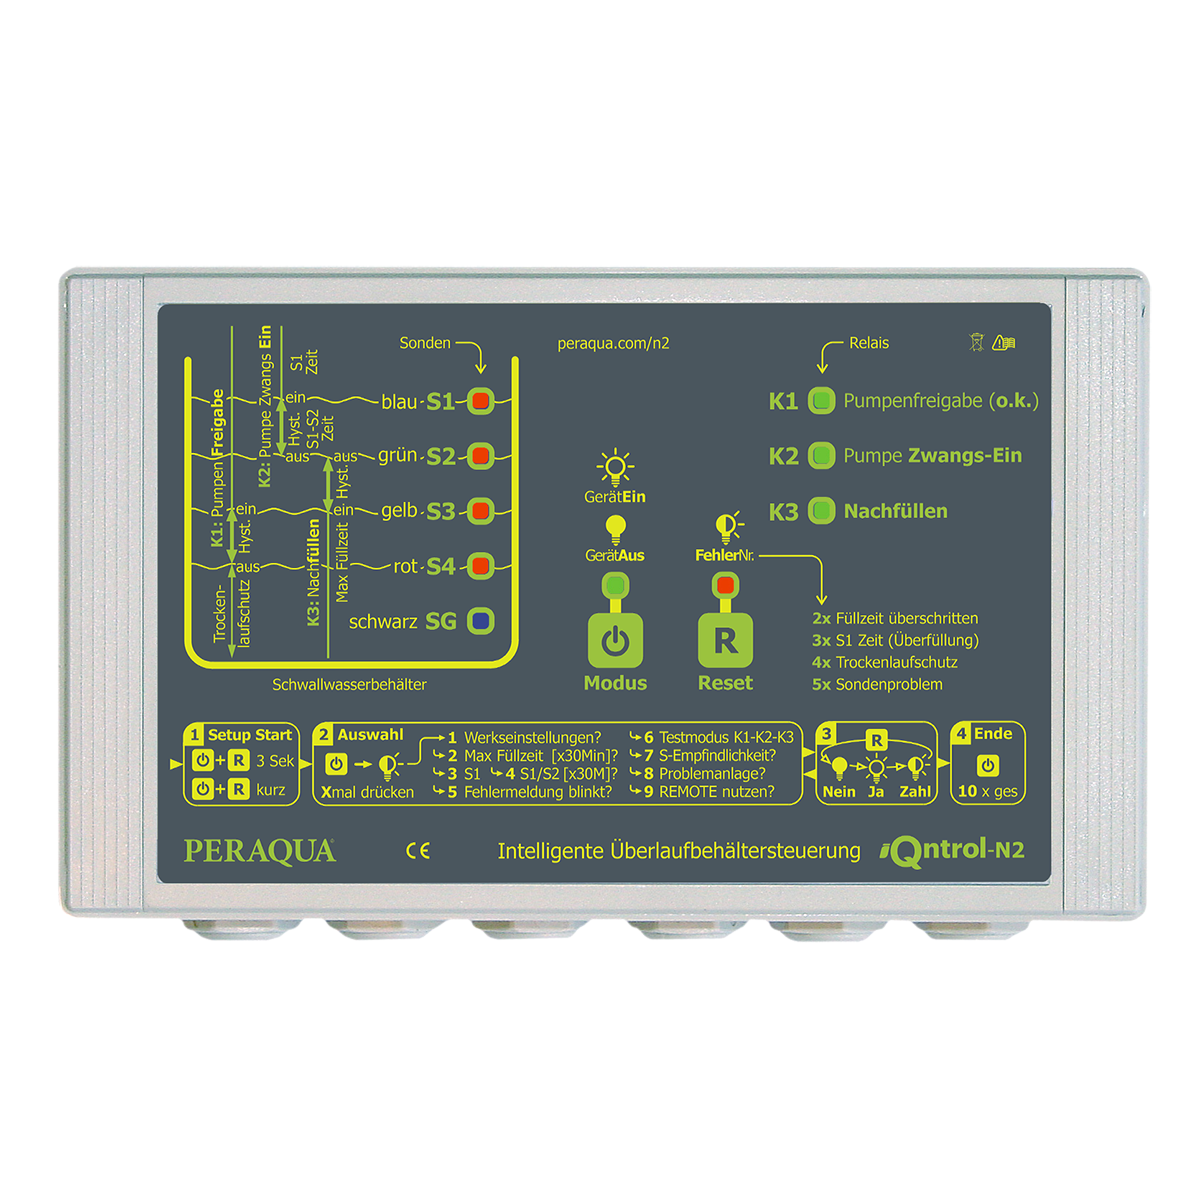 iQntrol-N2 control unit for compensation tank with 3 hysteresis for re-fill, overfill protection and dry run protection iQntrol-N2 control unit for compensation tank with 3 hysteresis for re-fill, overfill protection and dry run protection